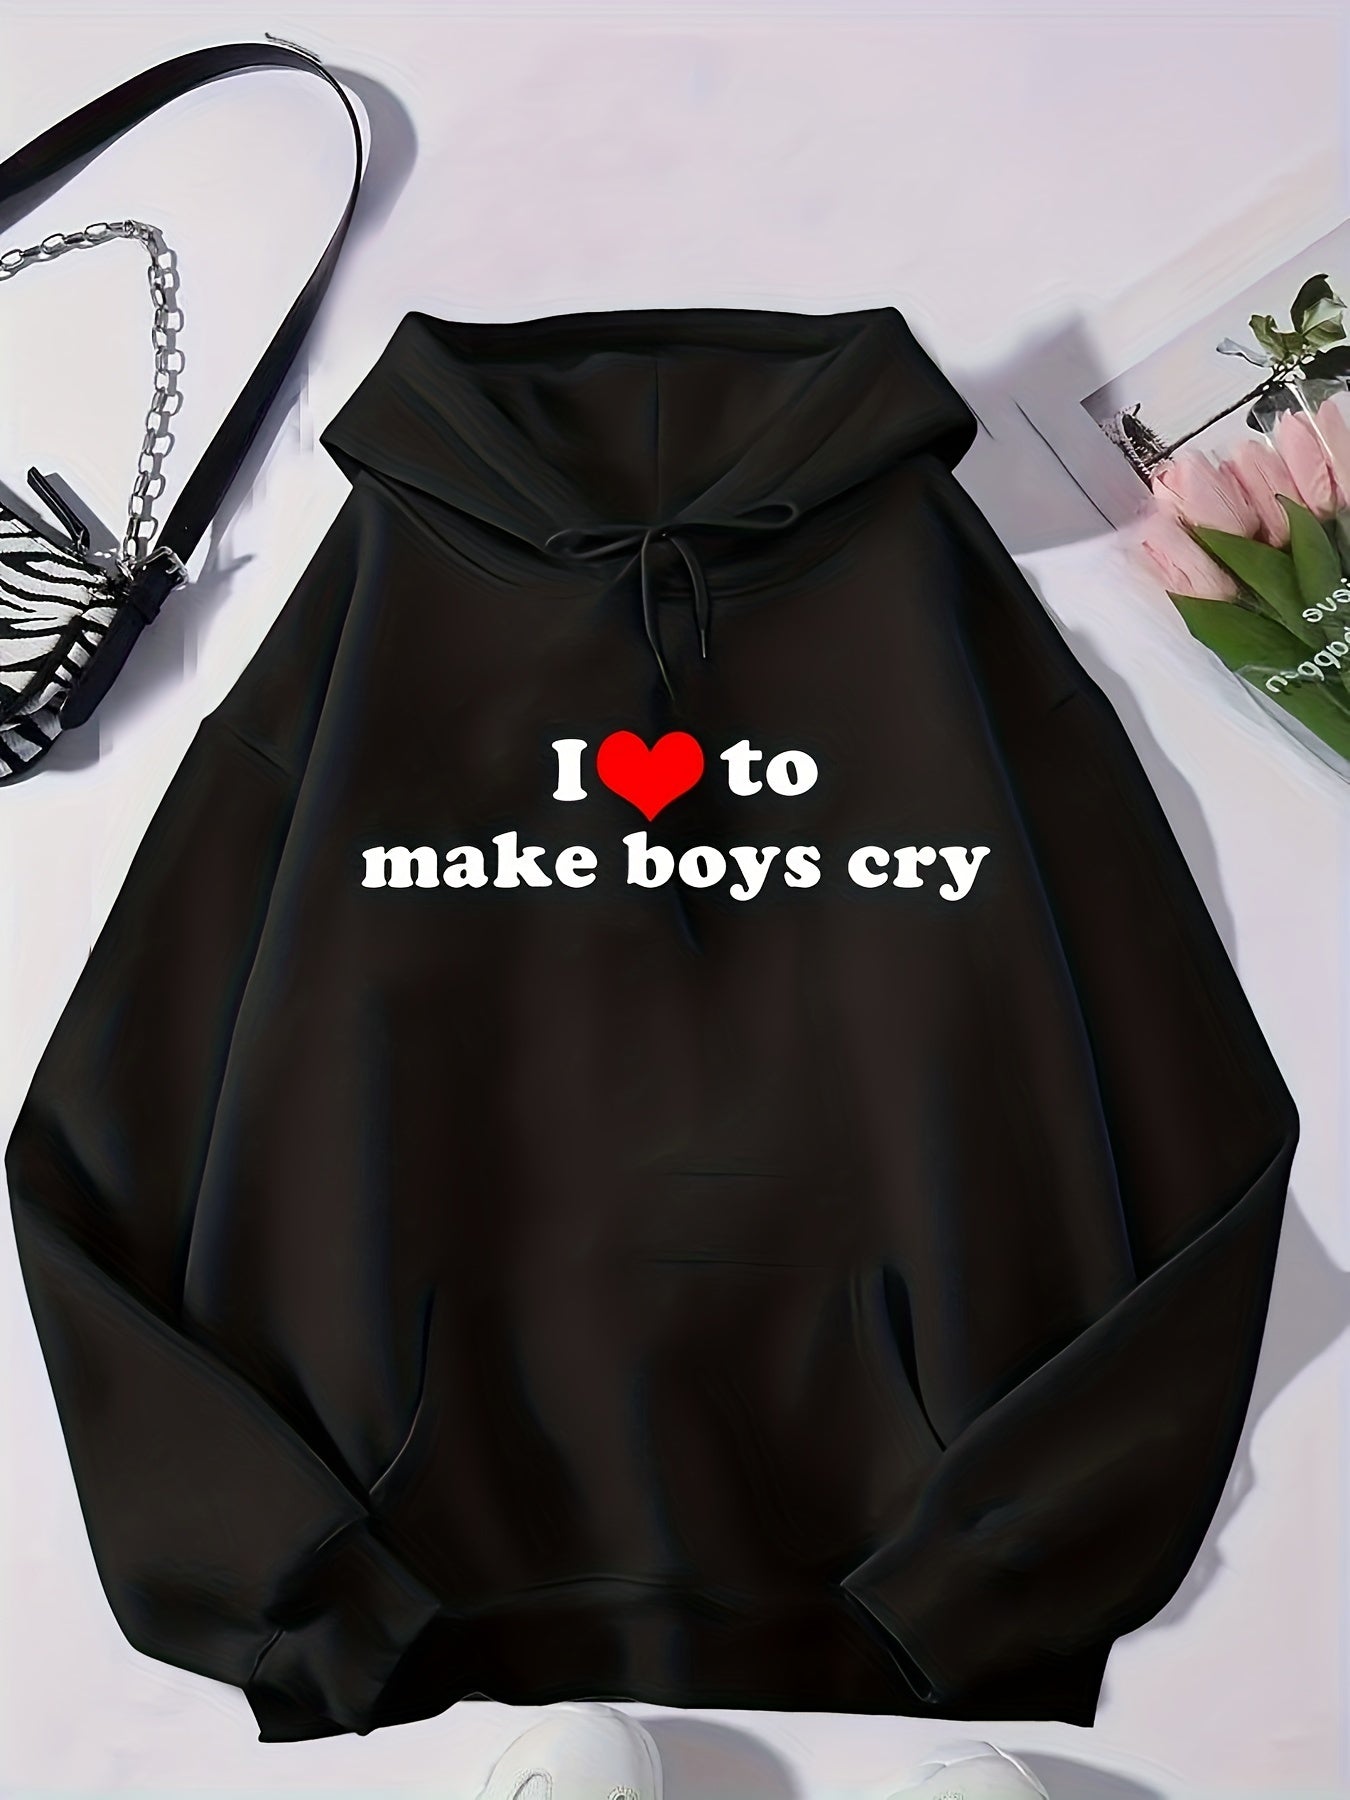 I Love to Make Boys Cry Women's Printed Sweatshirt-Casual Autumn Comfortable Pullover-Long Sleeve Solid Color Top